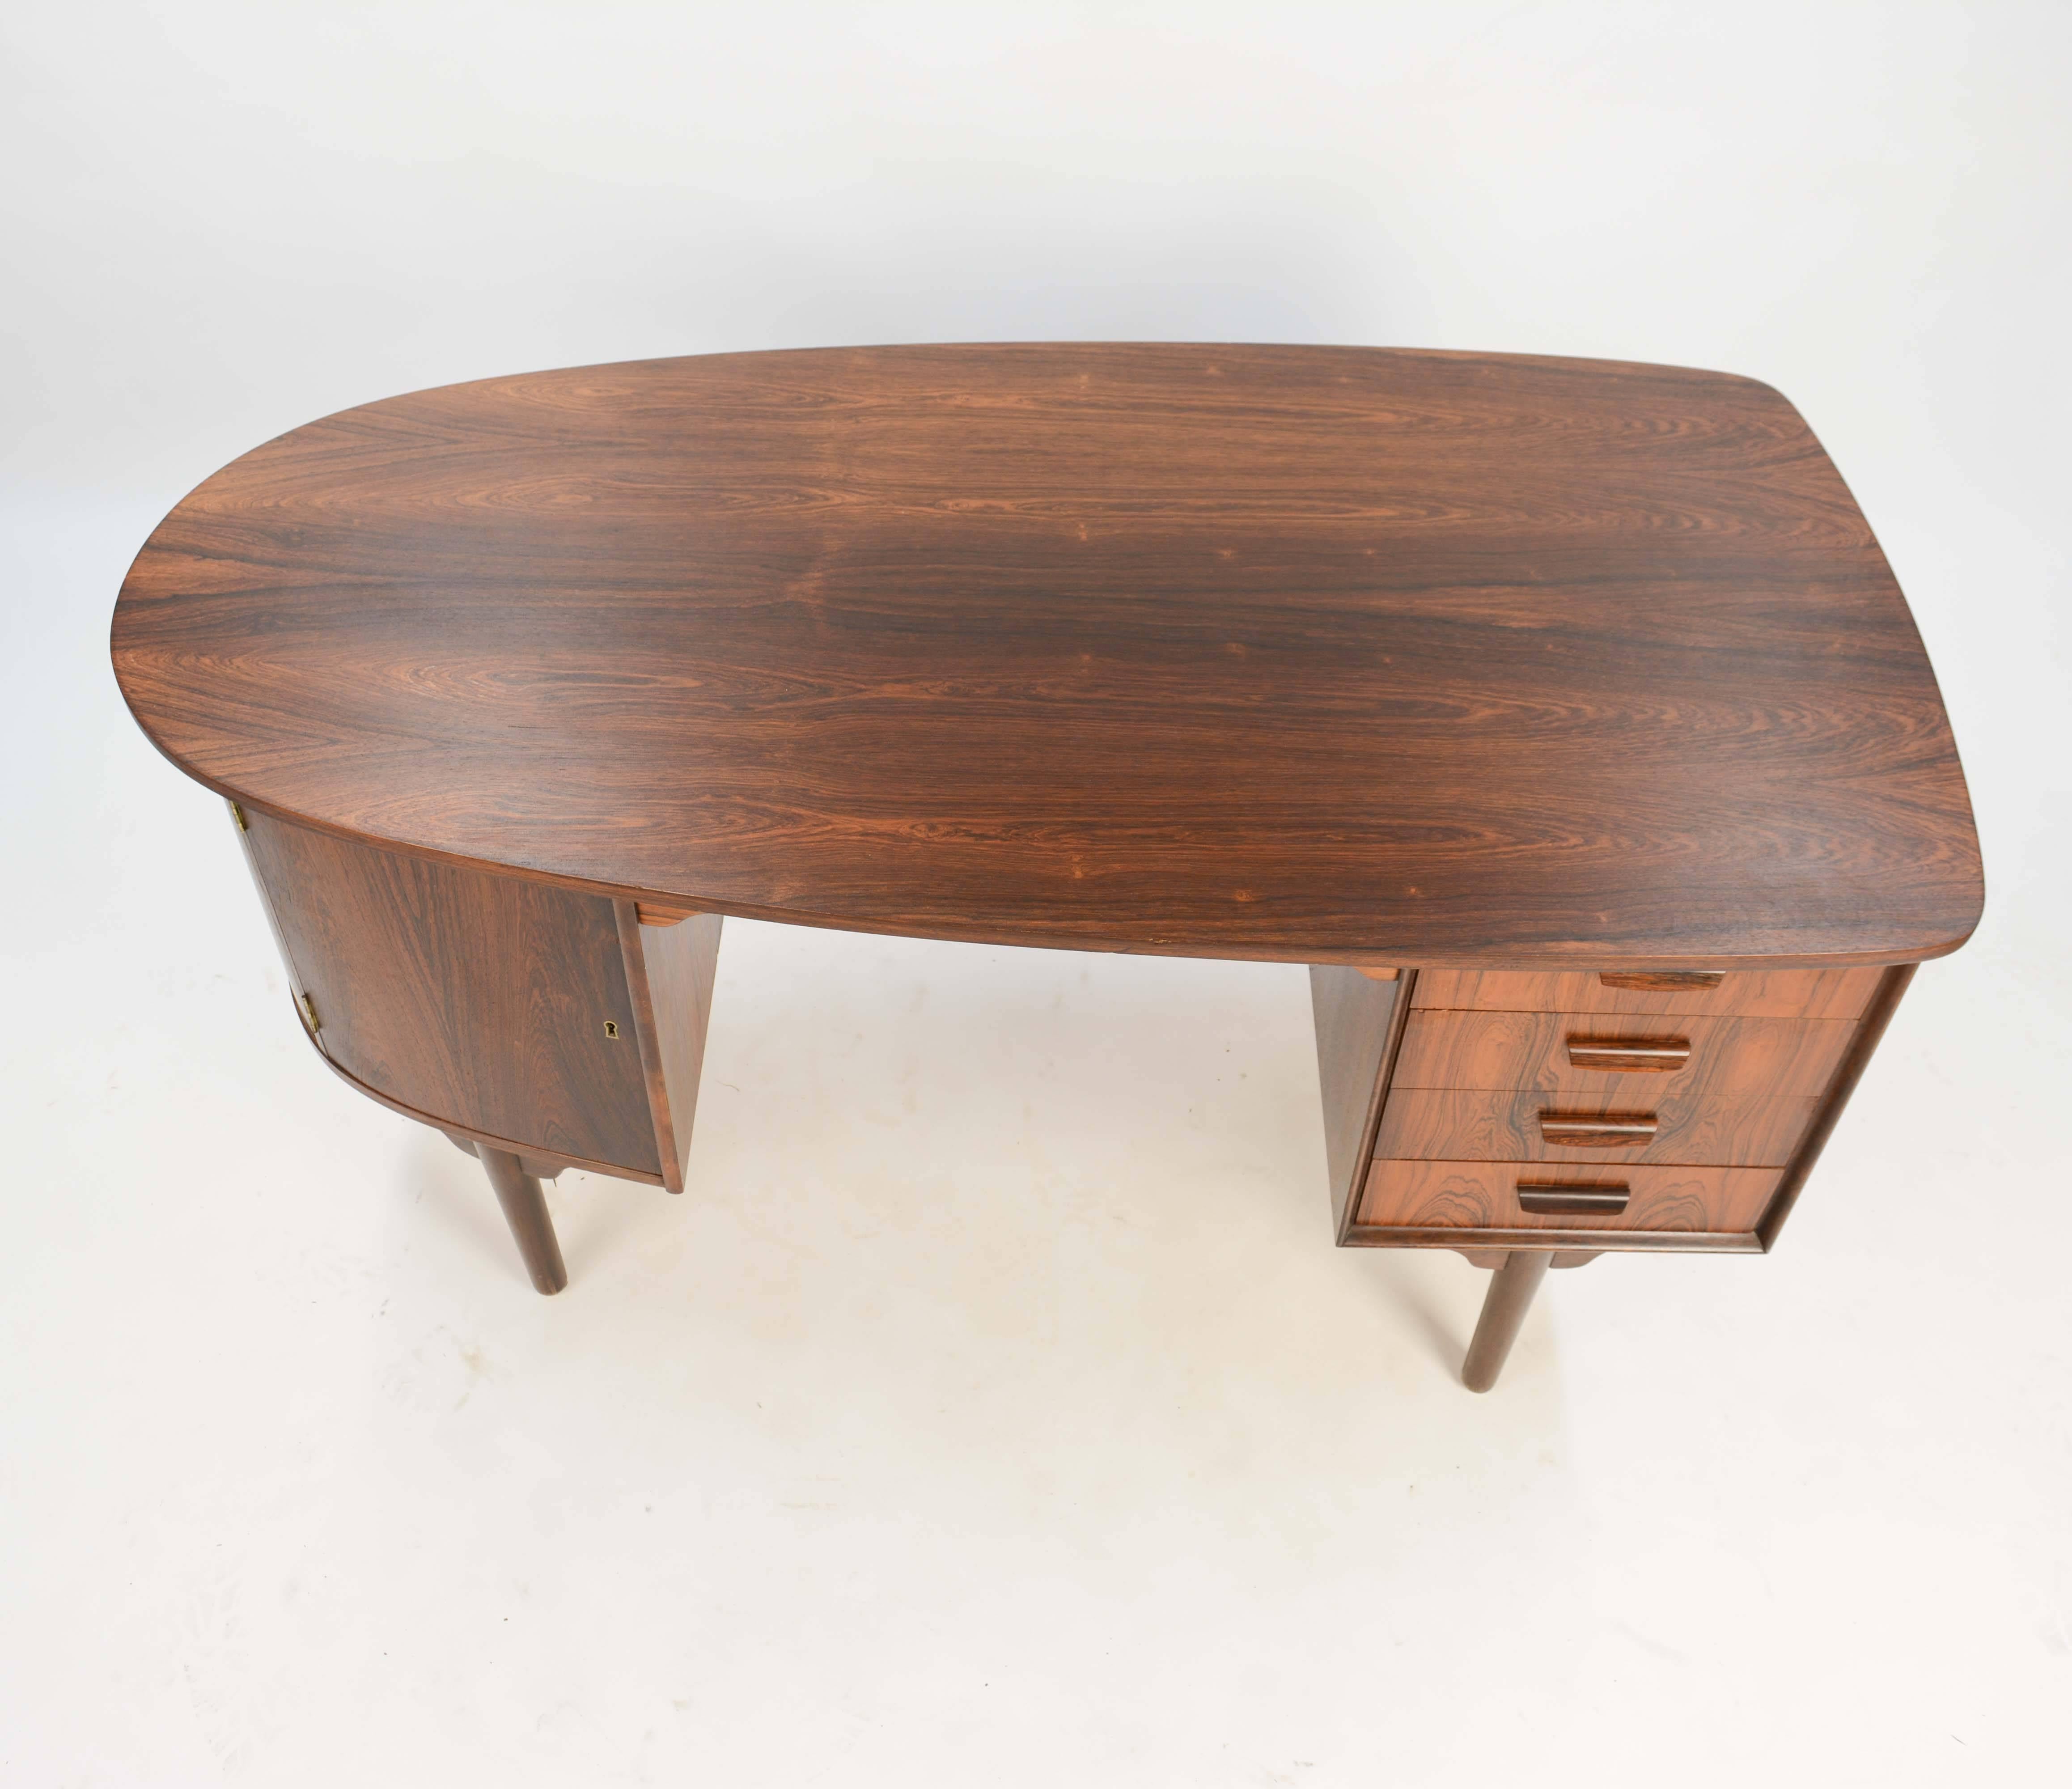 Magnificent and Sensual Kai Kristensen Rosewood Executive Desk from Denmark 1